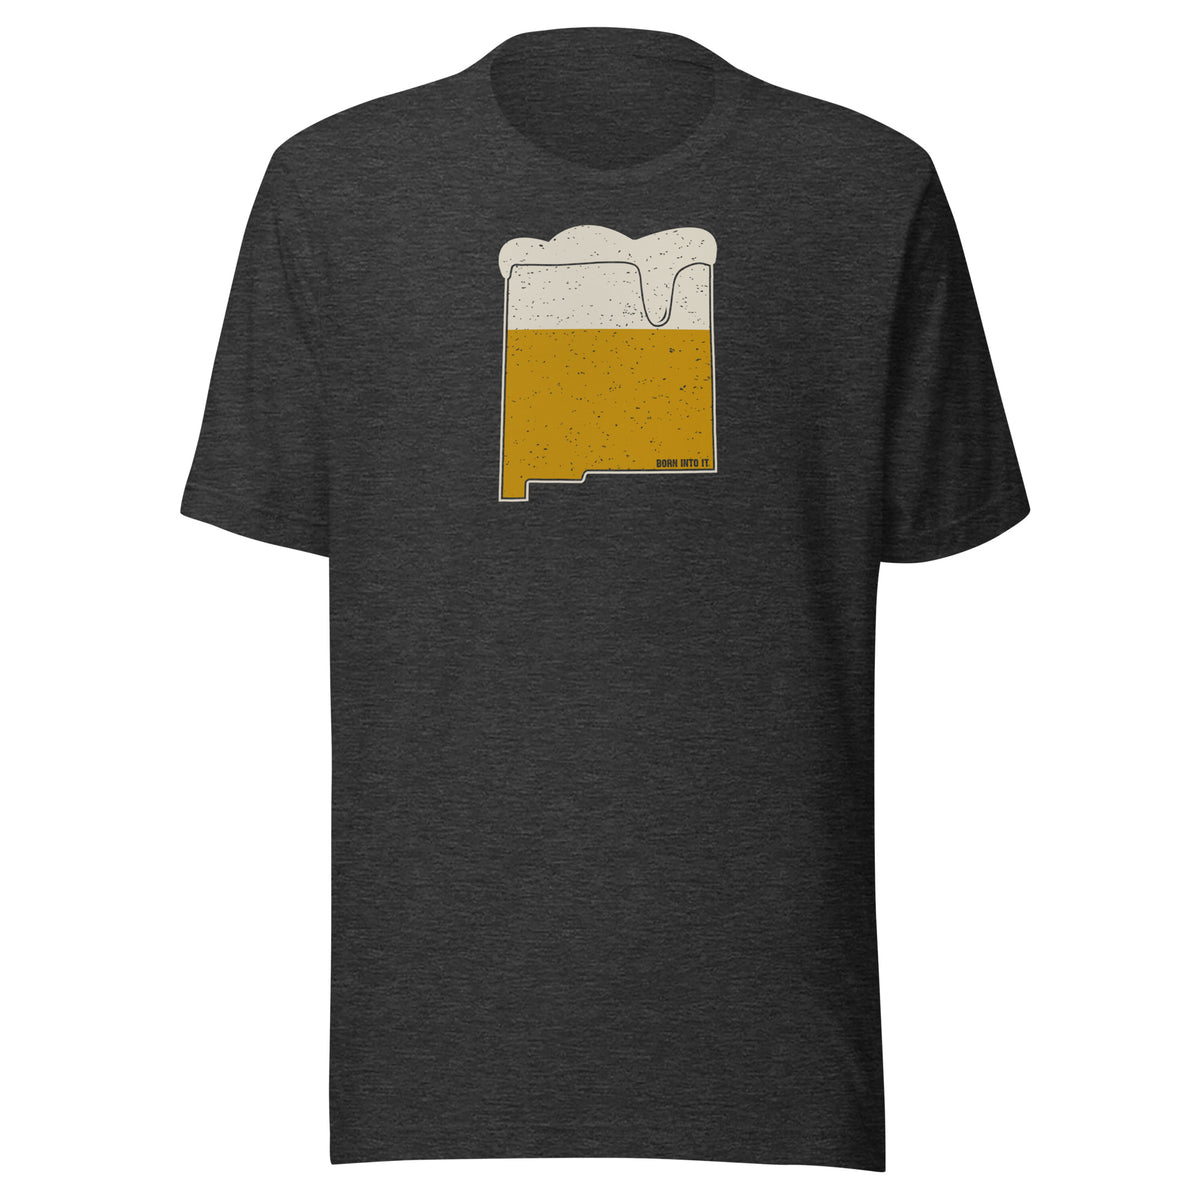 New Mexico On Tap Unisex t-shirt